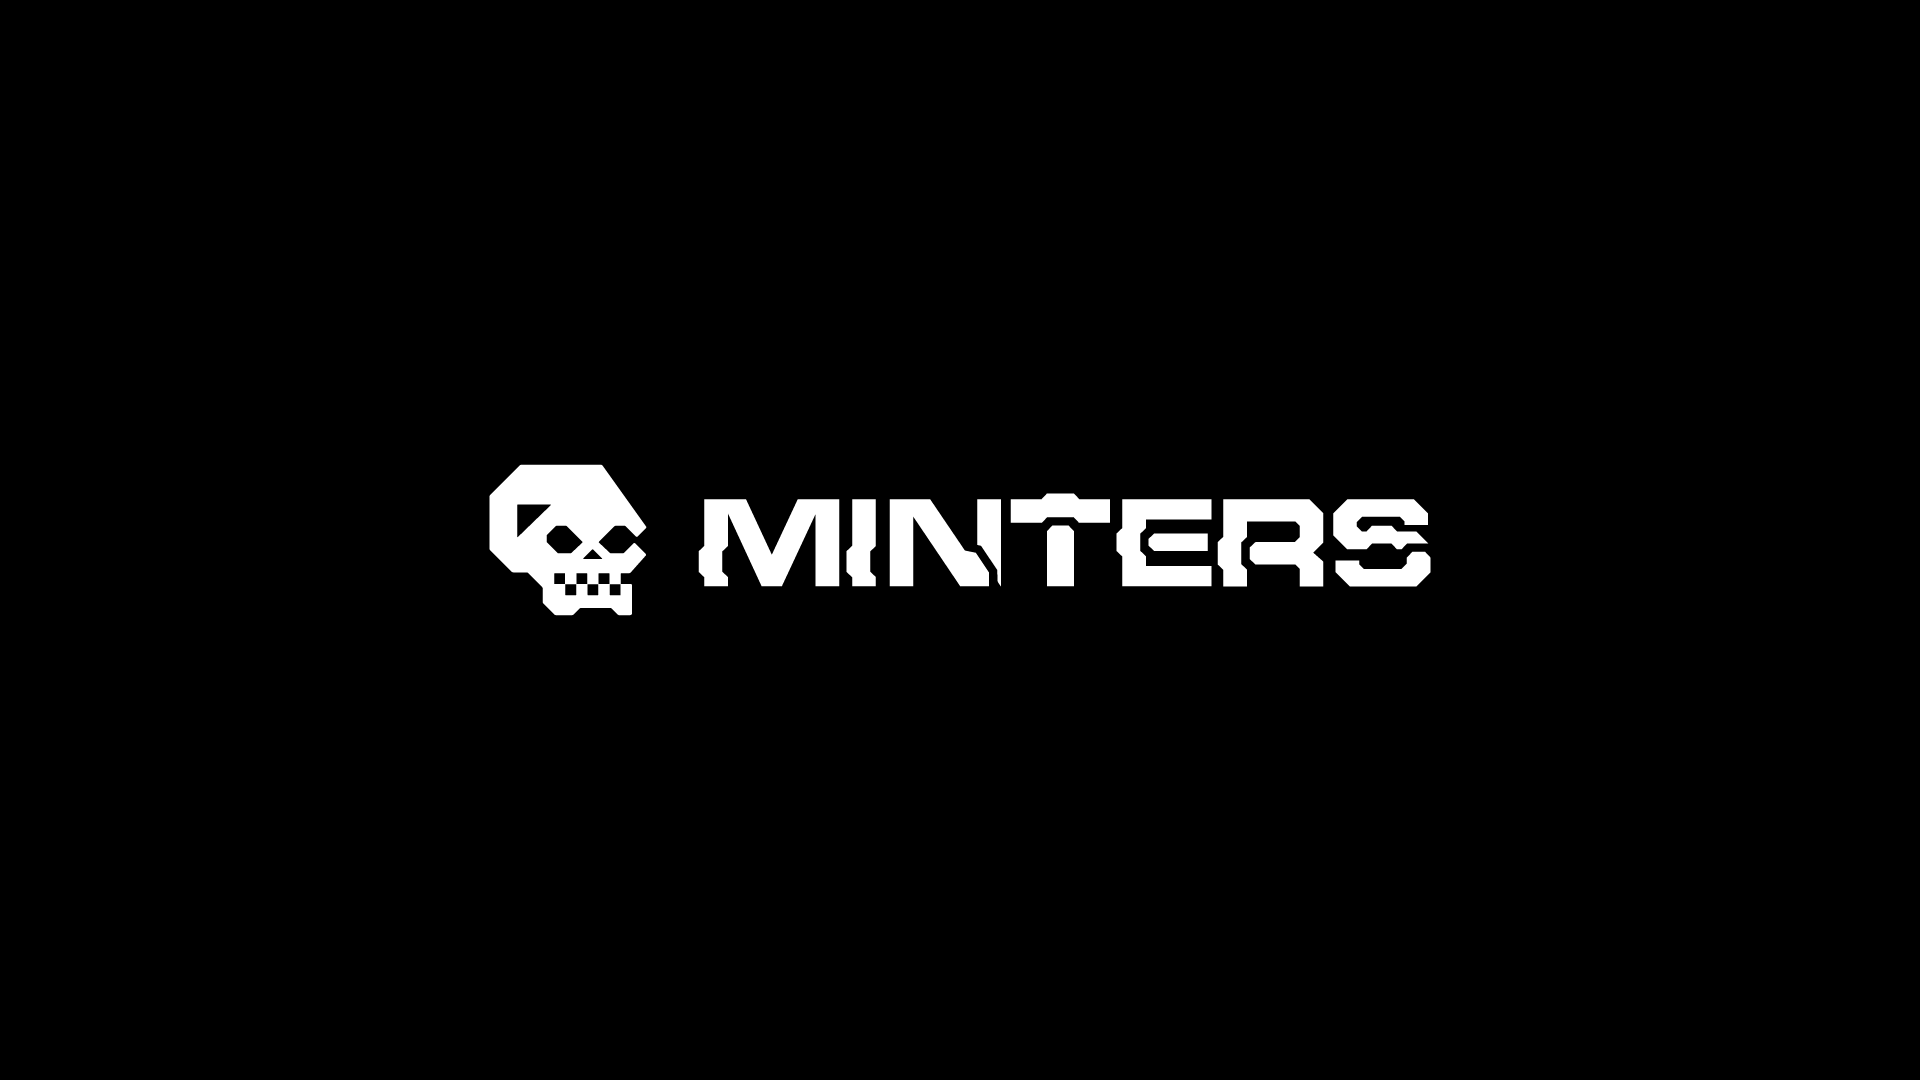 The Minters NFT - Launching in August 2022.